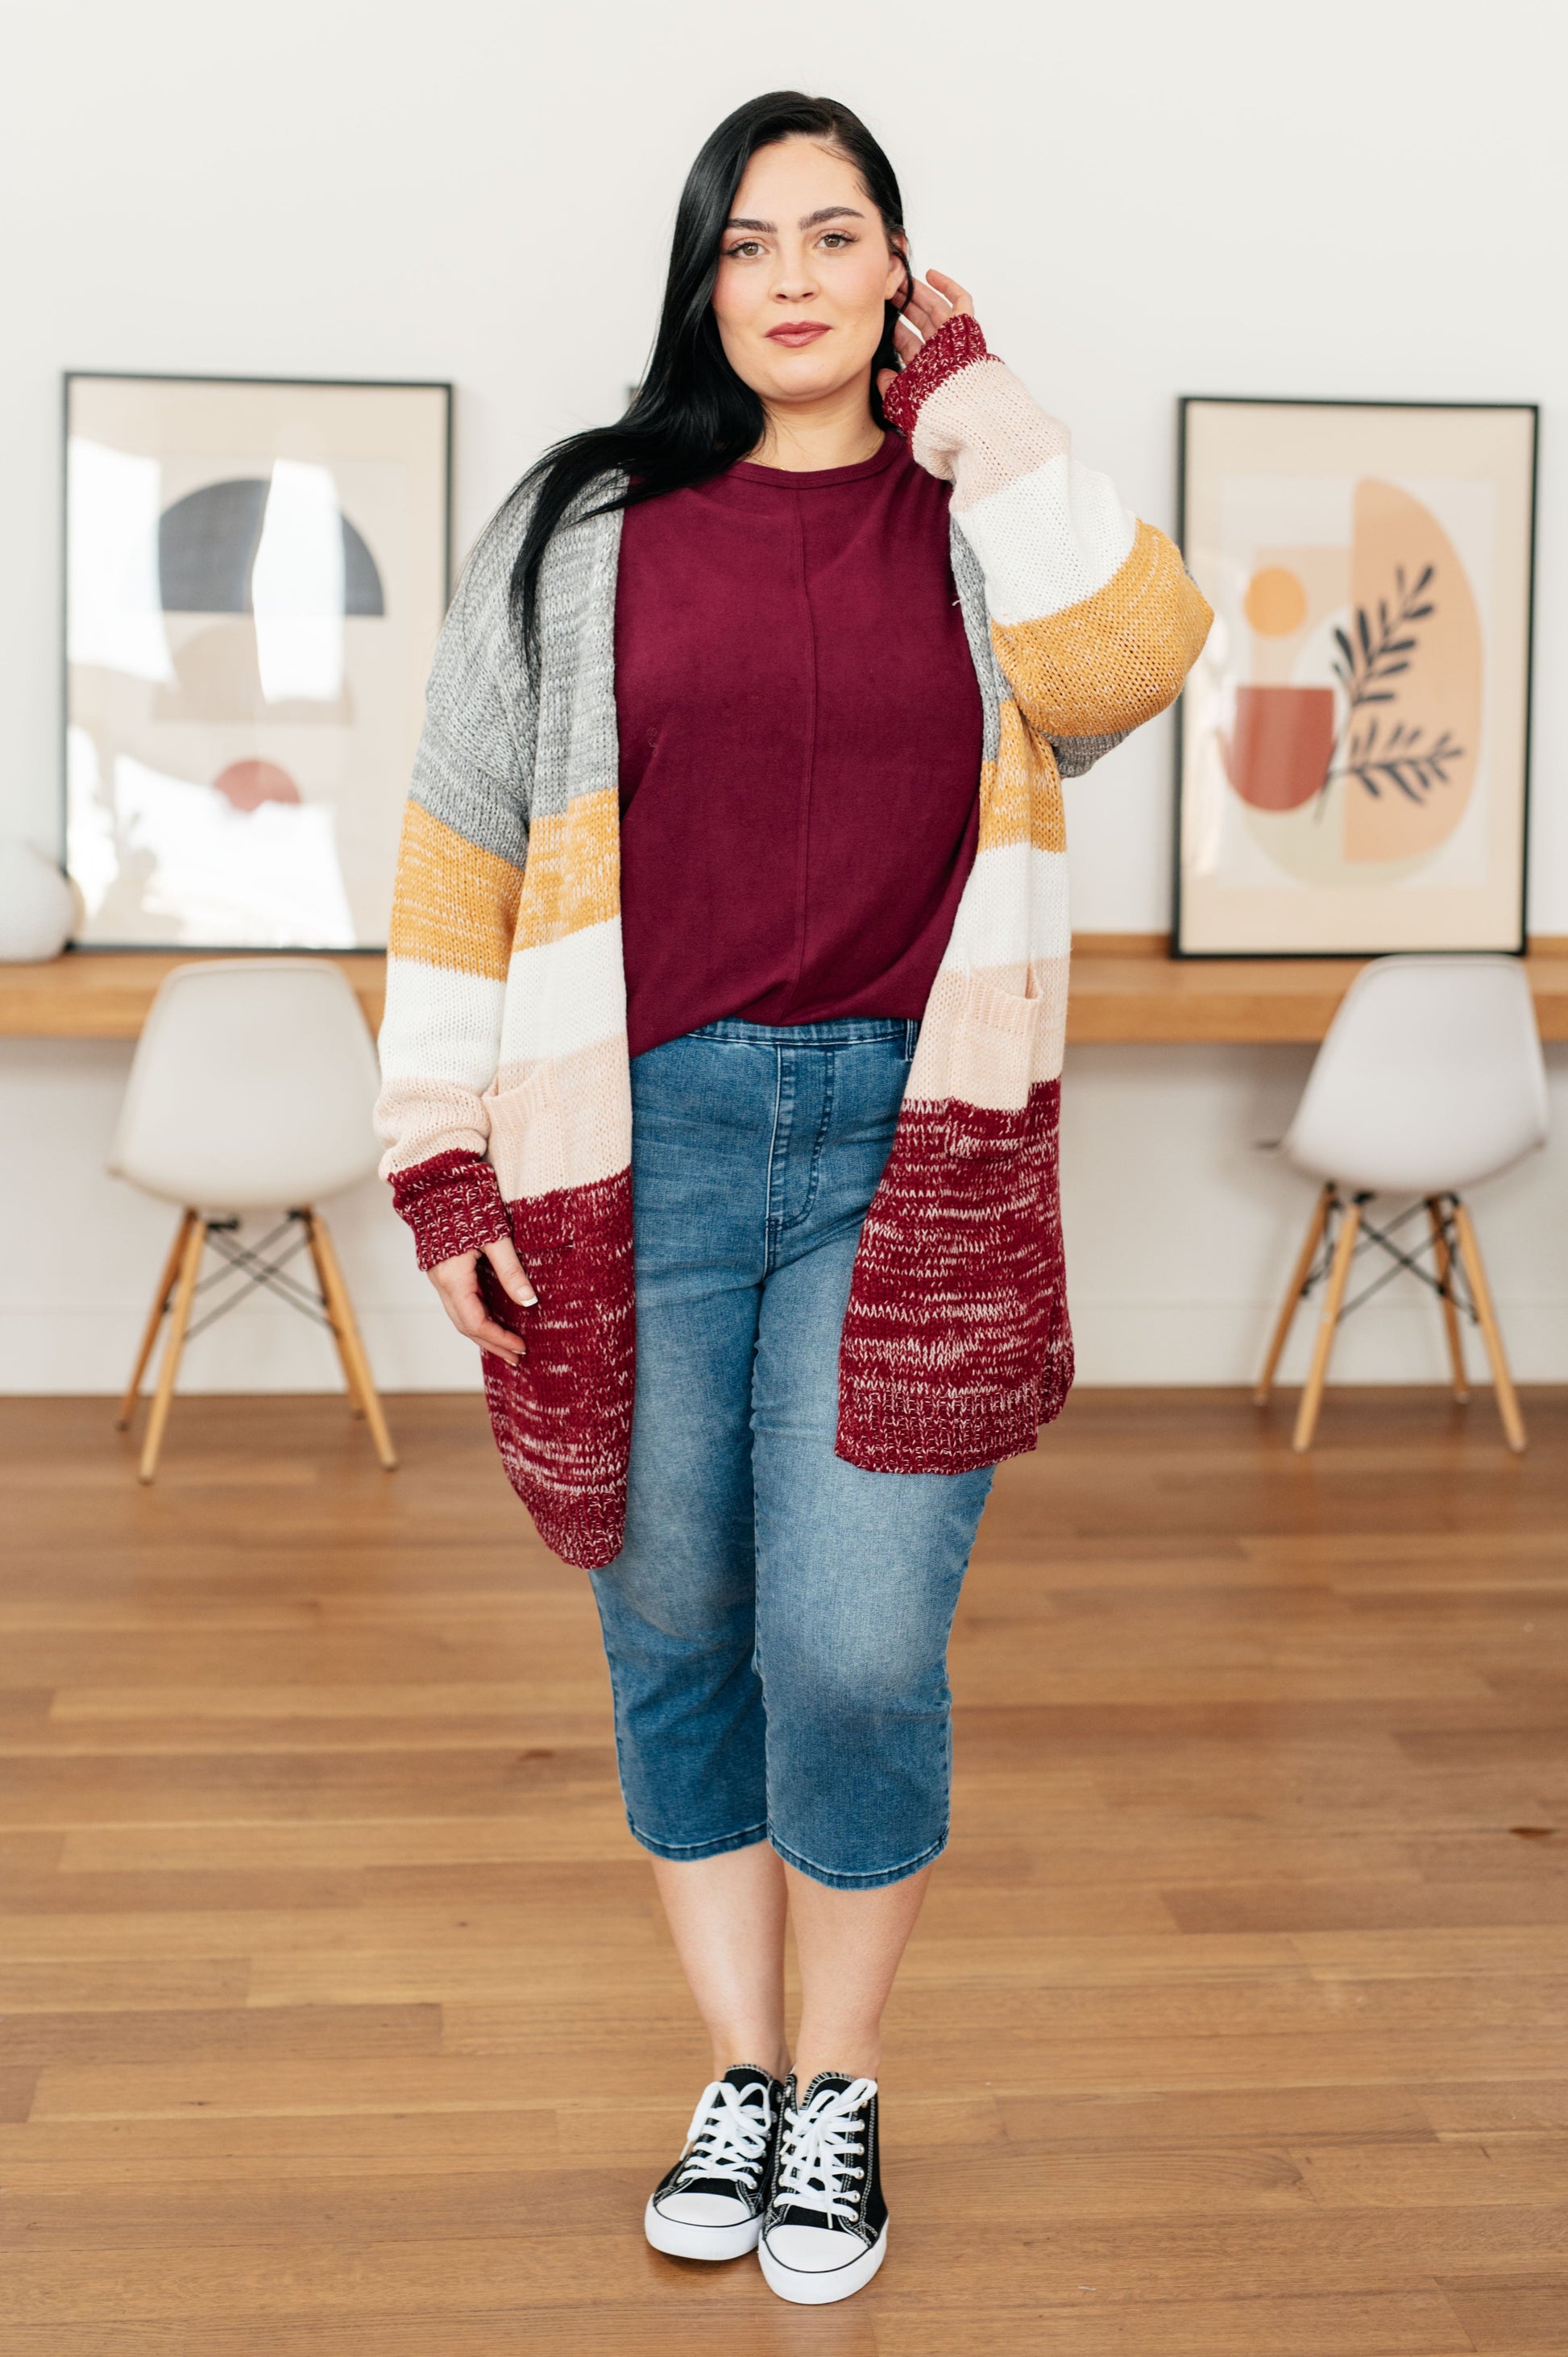 Drive Downtown Dolman Sleeve Top in Wine - Southern Divas Boutique